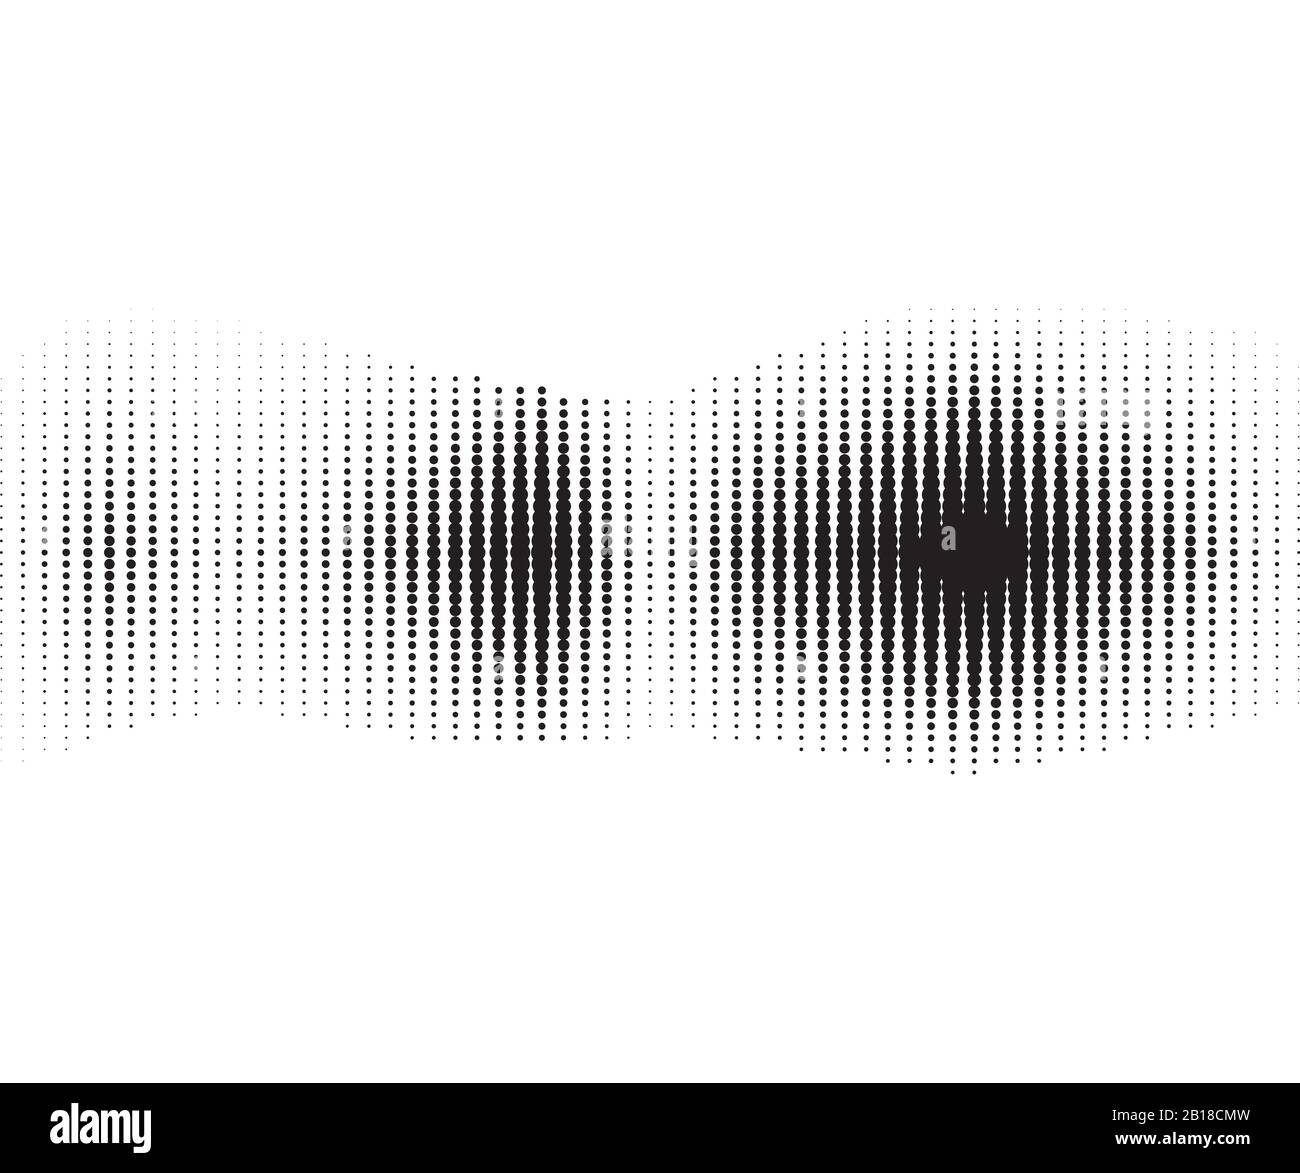 Halftone, transition, monochrome, dotted pattern. Vector illustration. Stock Vector